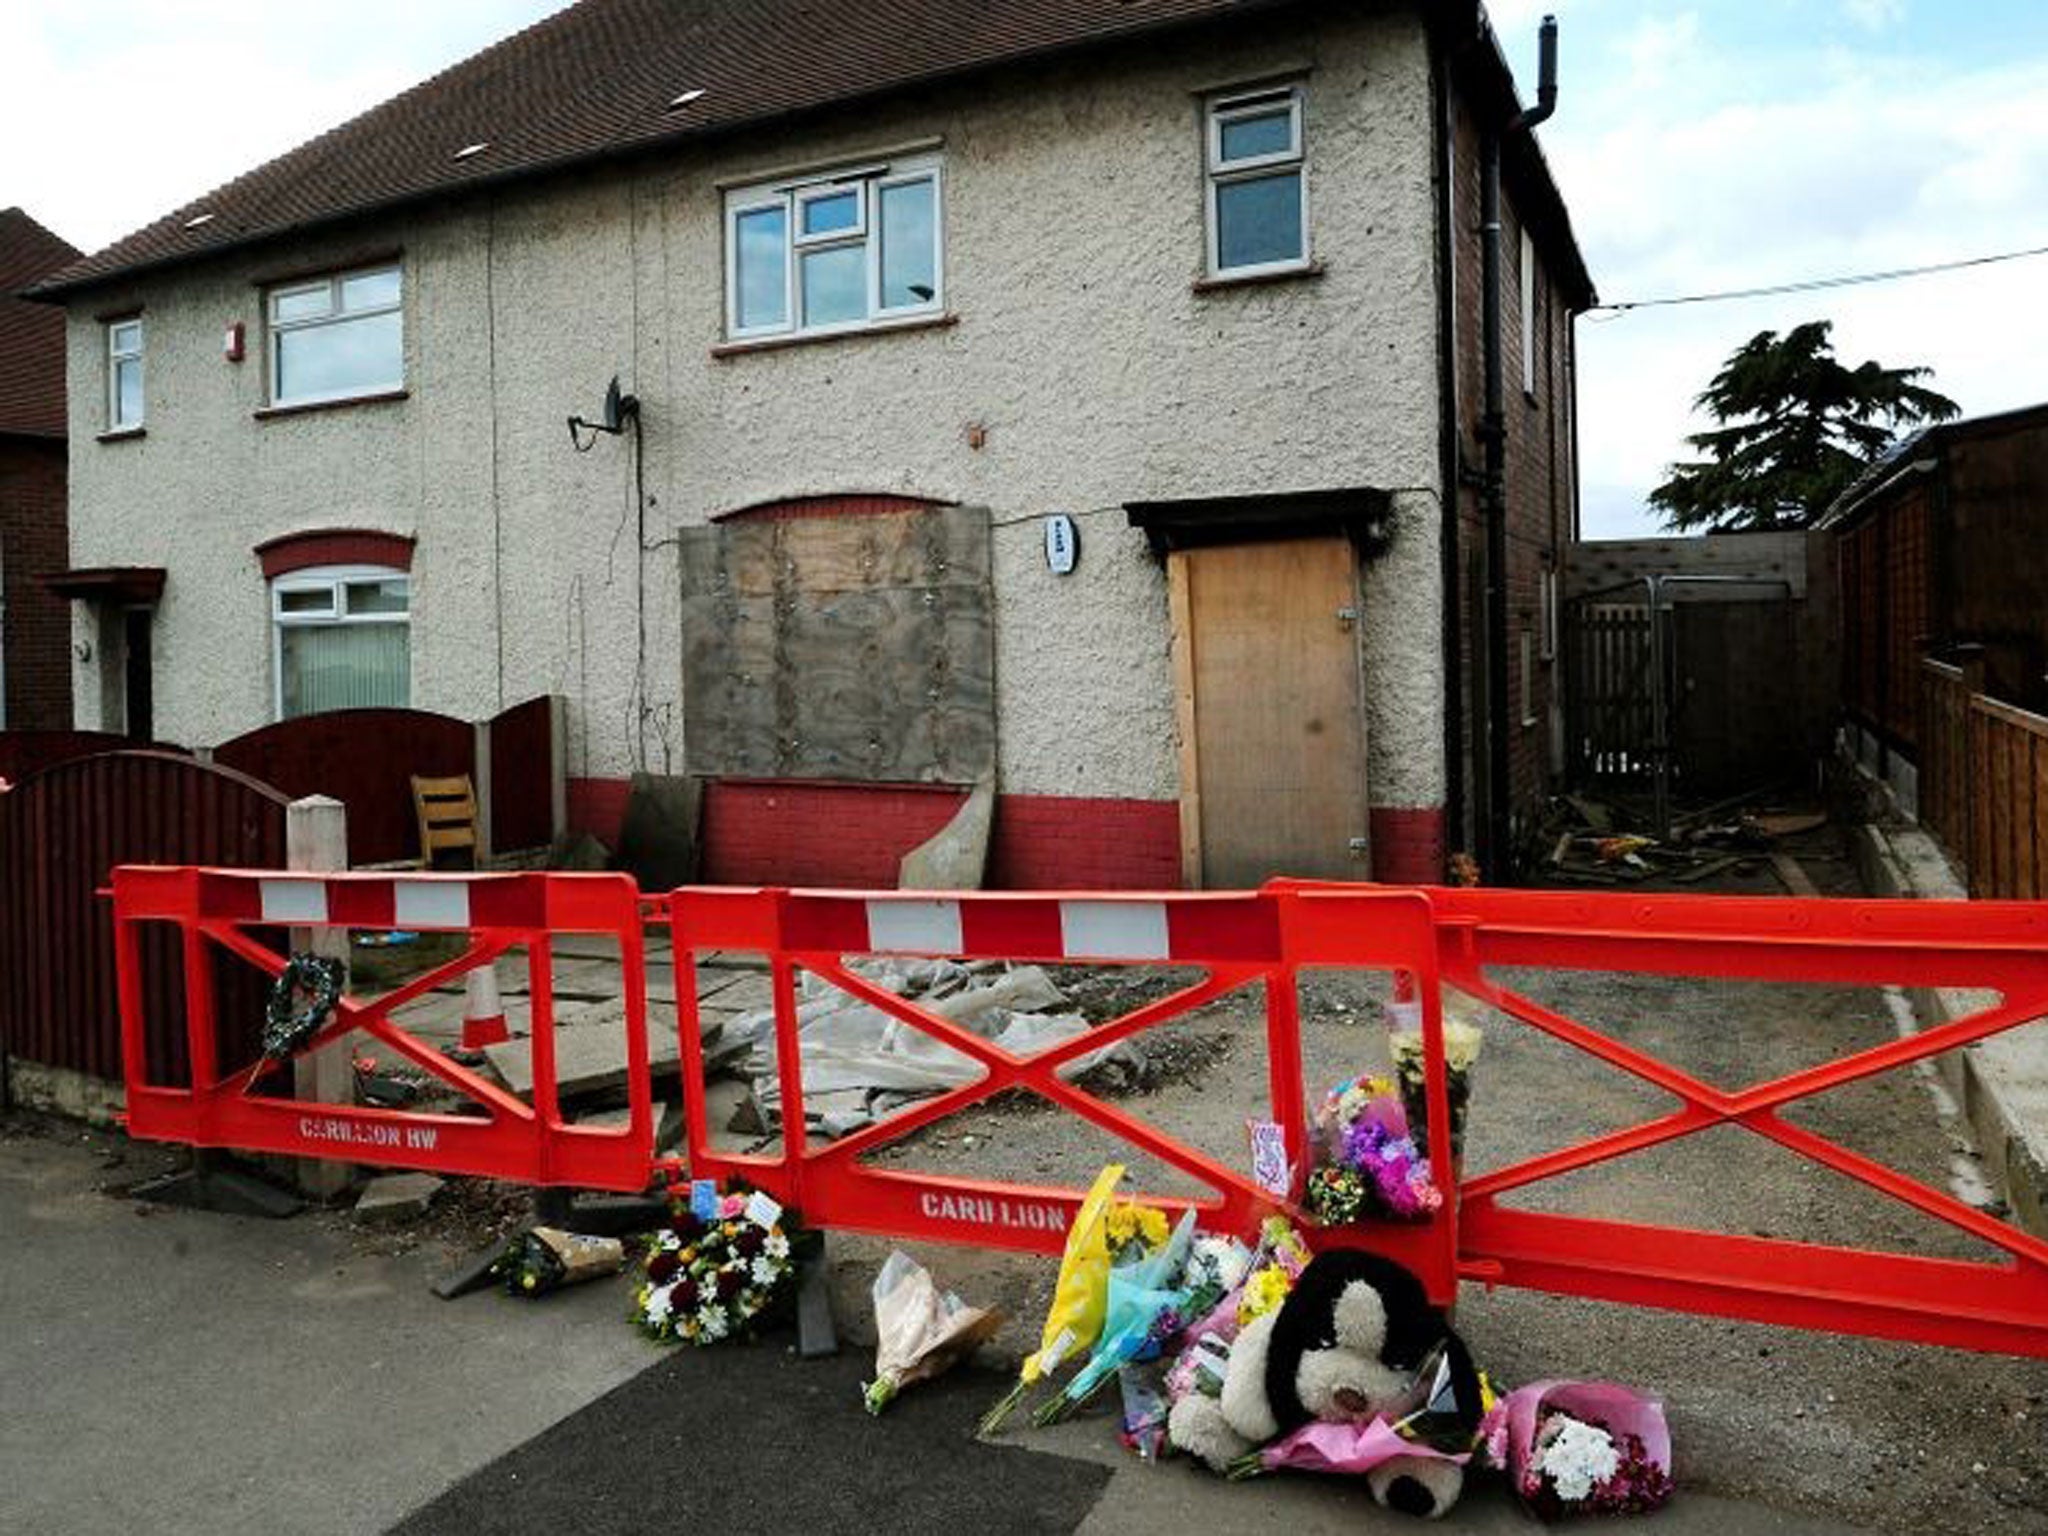 This house - in which Mick Philpott killed six of his 17 children - well be demolished